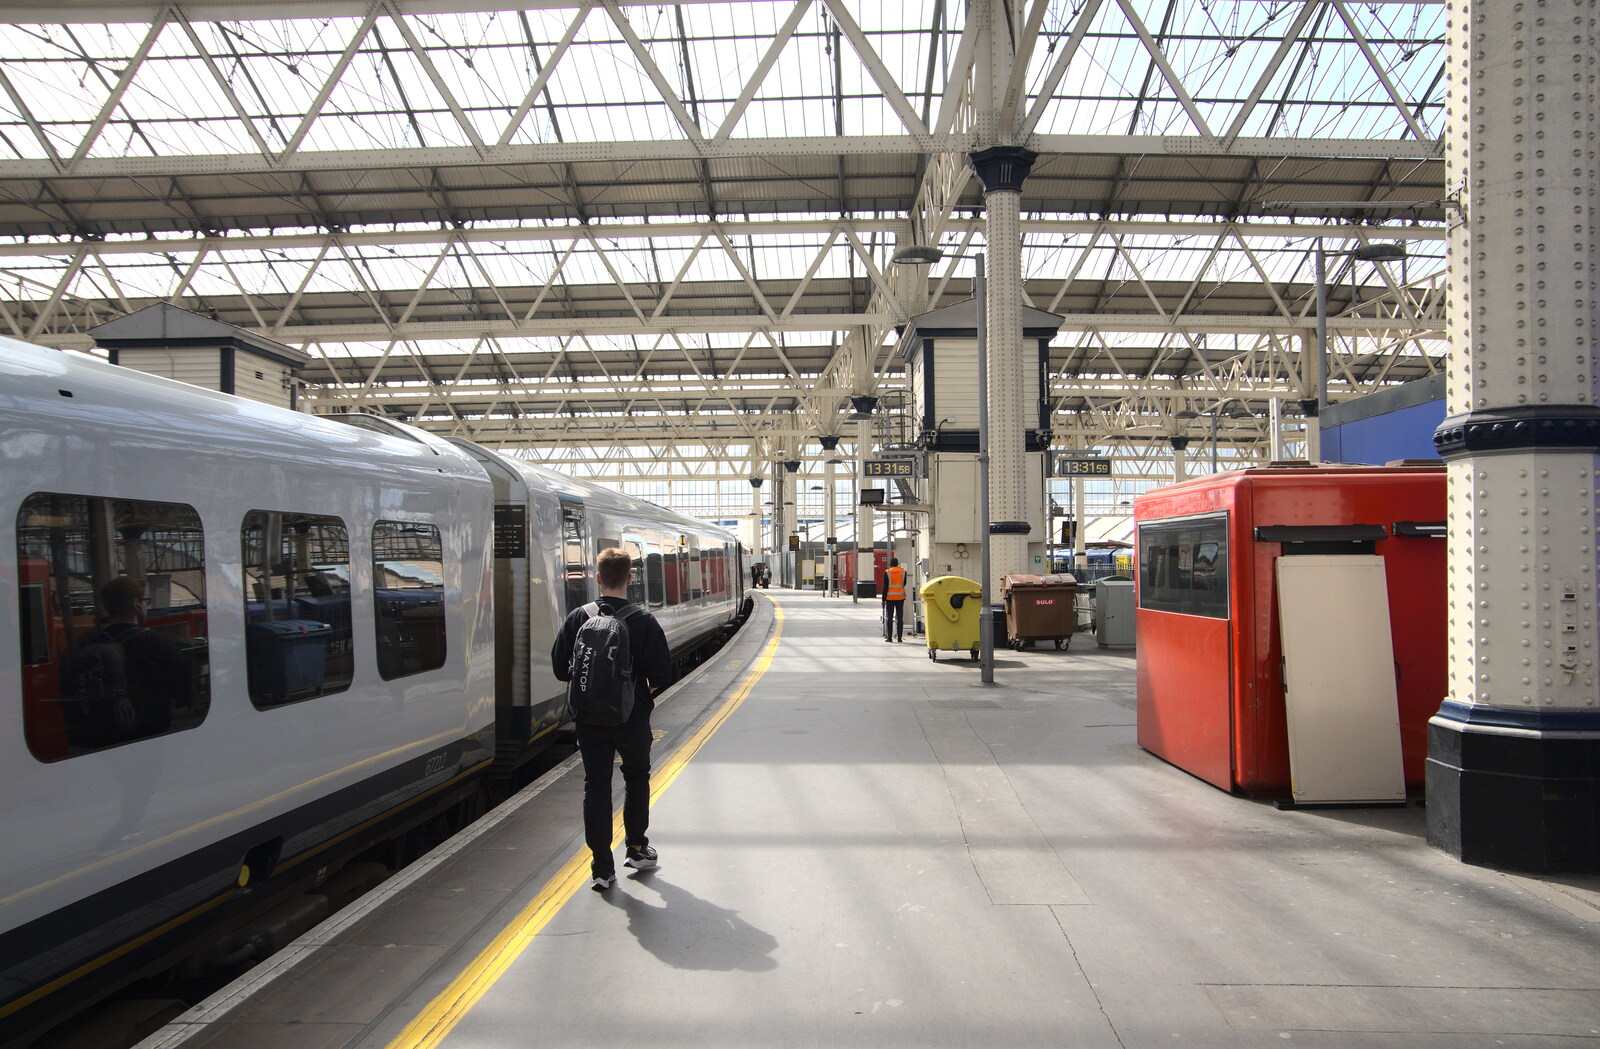 A Trip Down South, New Milton, Hampshire - 9th April 2022: The train to New Milton waits at Waterloo